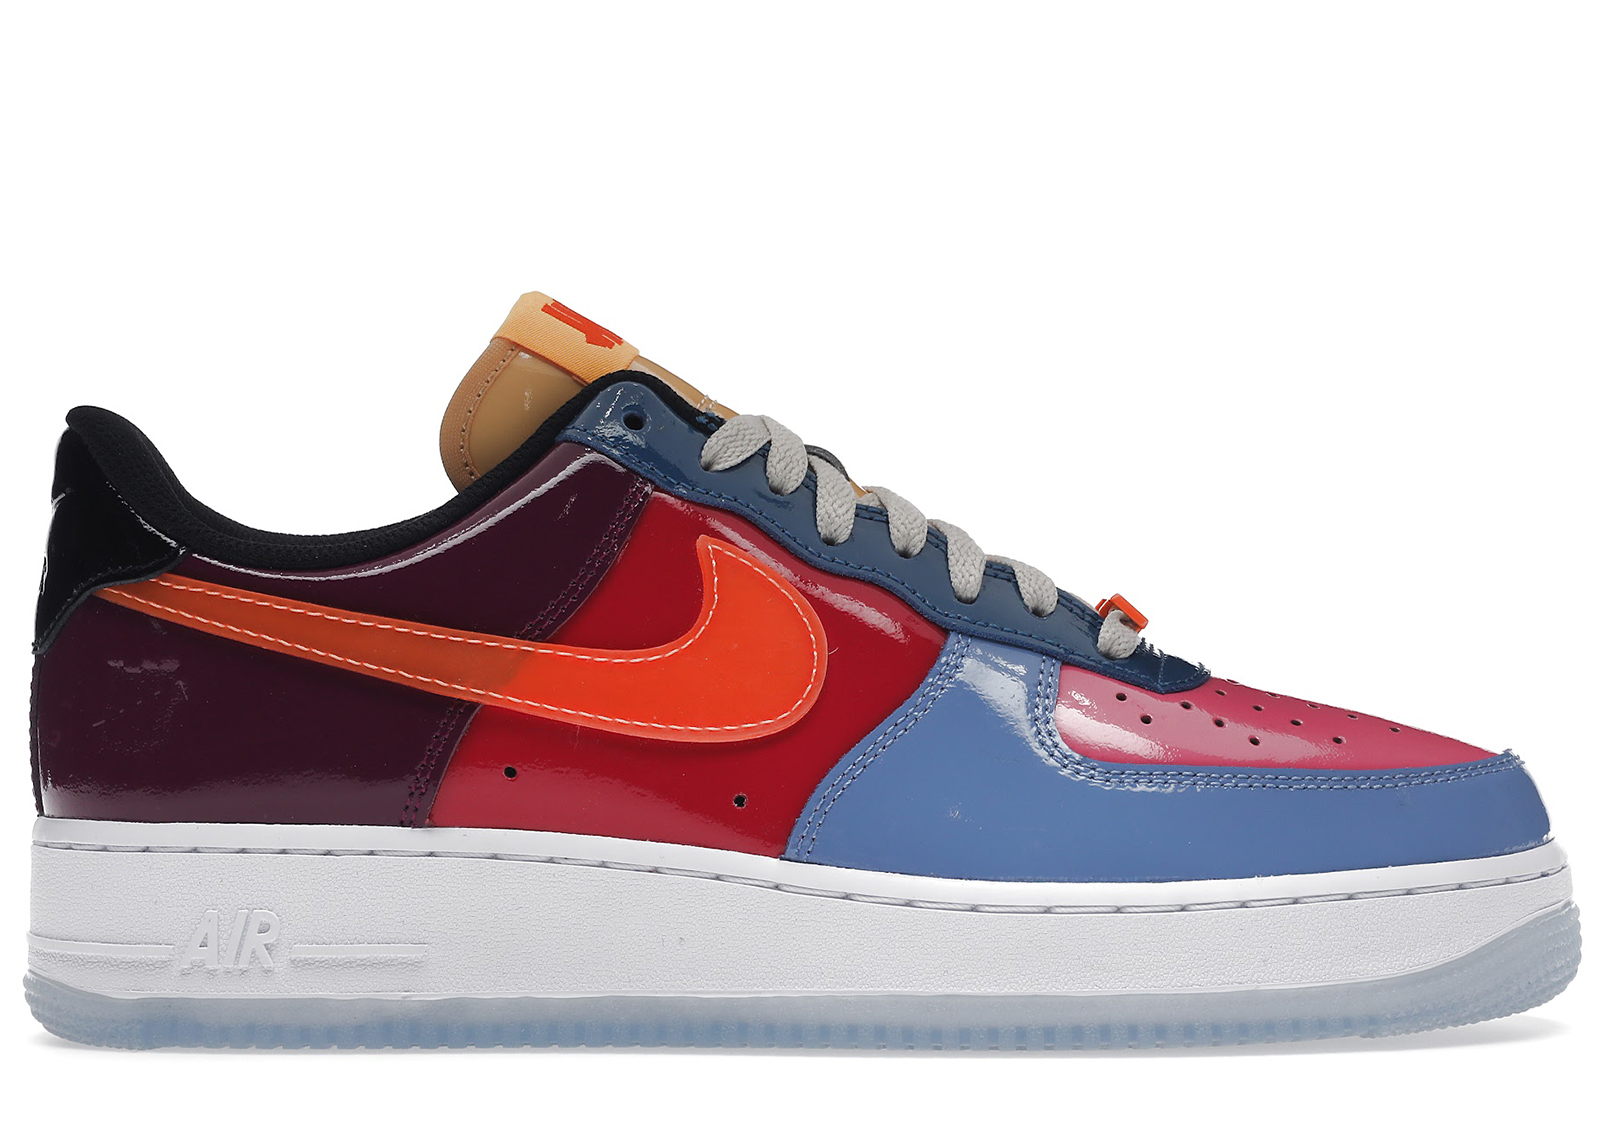 Nike Air Force 1 Low SP Undefeated Multi-Patent Total Orange Men's 